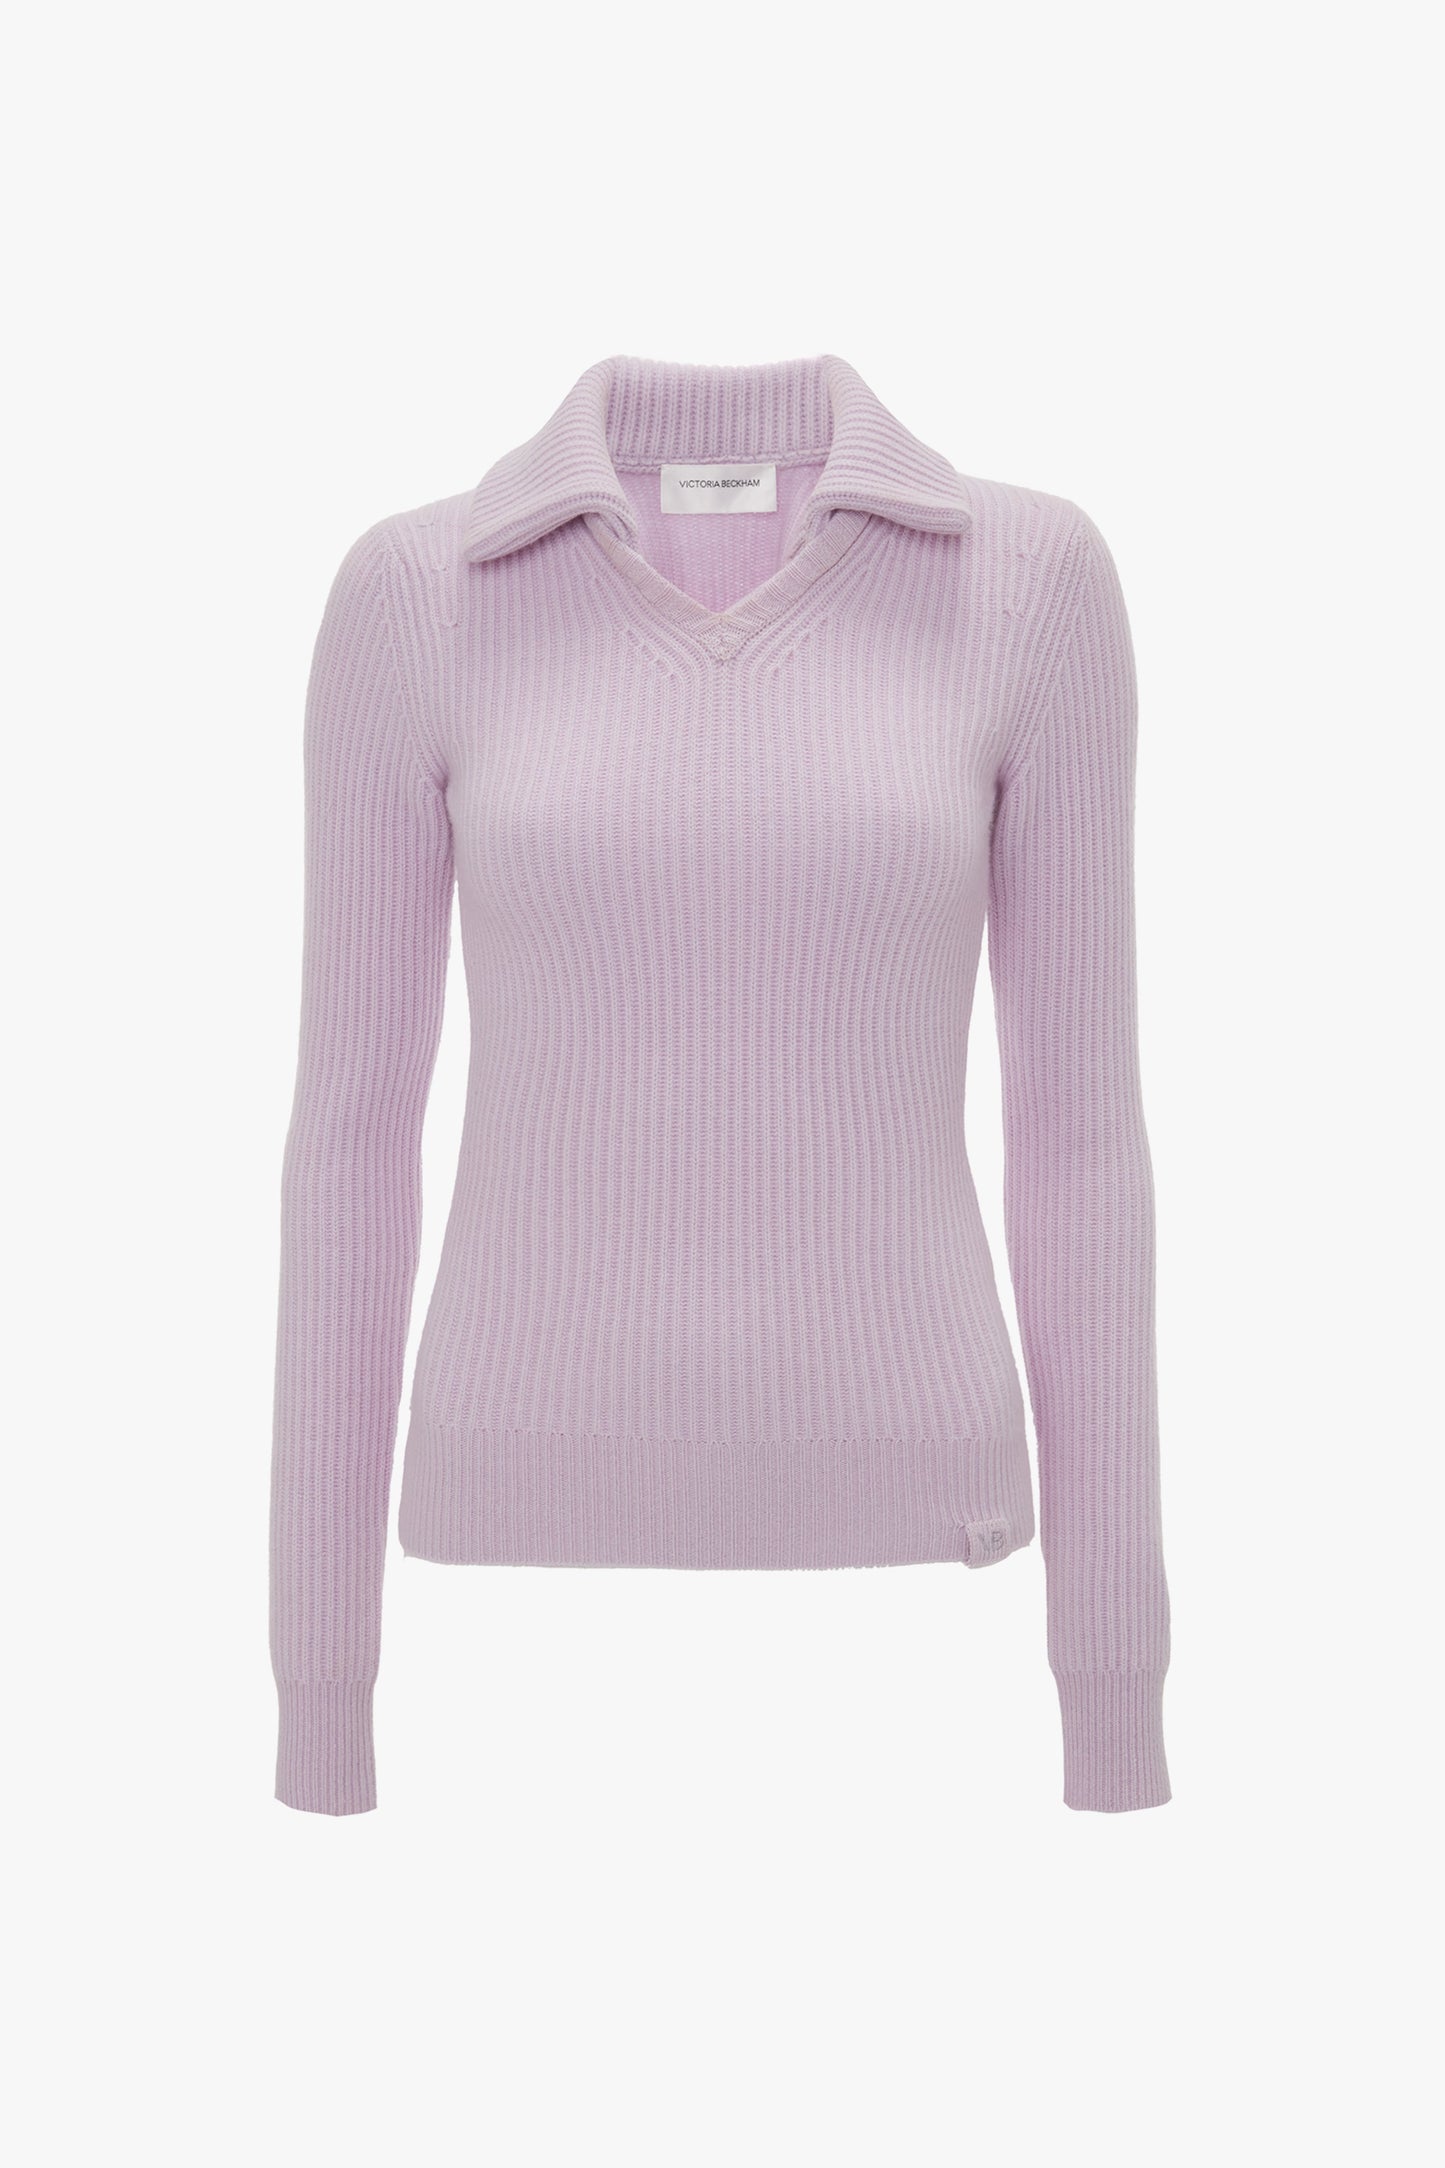 Lilac long-sleeve ribbed sweater with a collar and V-neckline, reminiscent of a textured knit, displayed on a white background. It's the Double Collared Jumper In Petunia by Victoria Beckham.